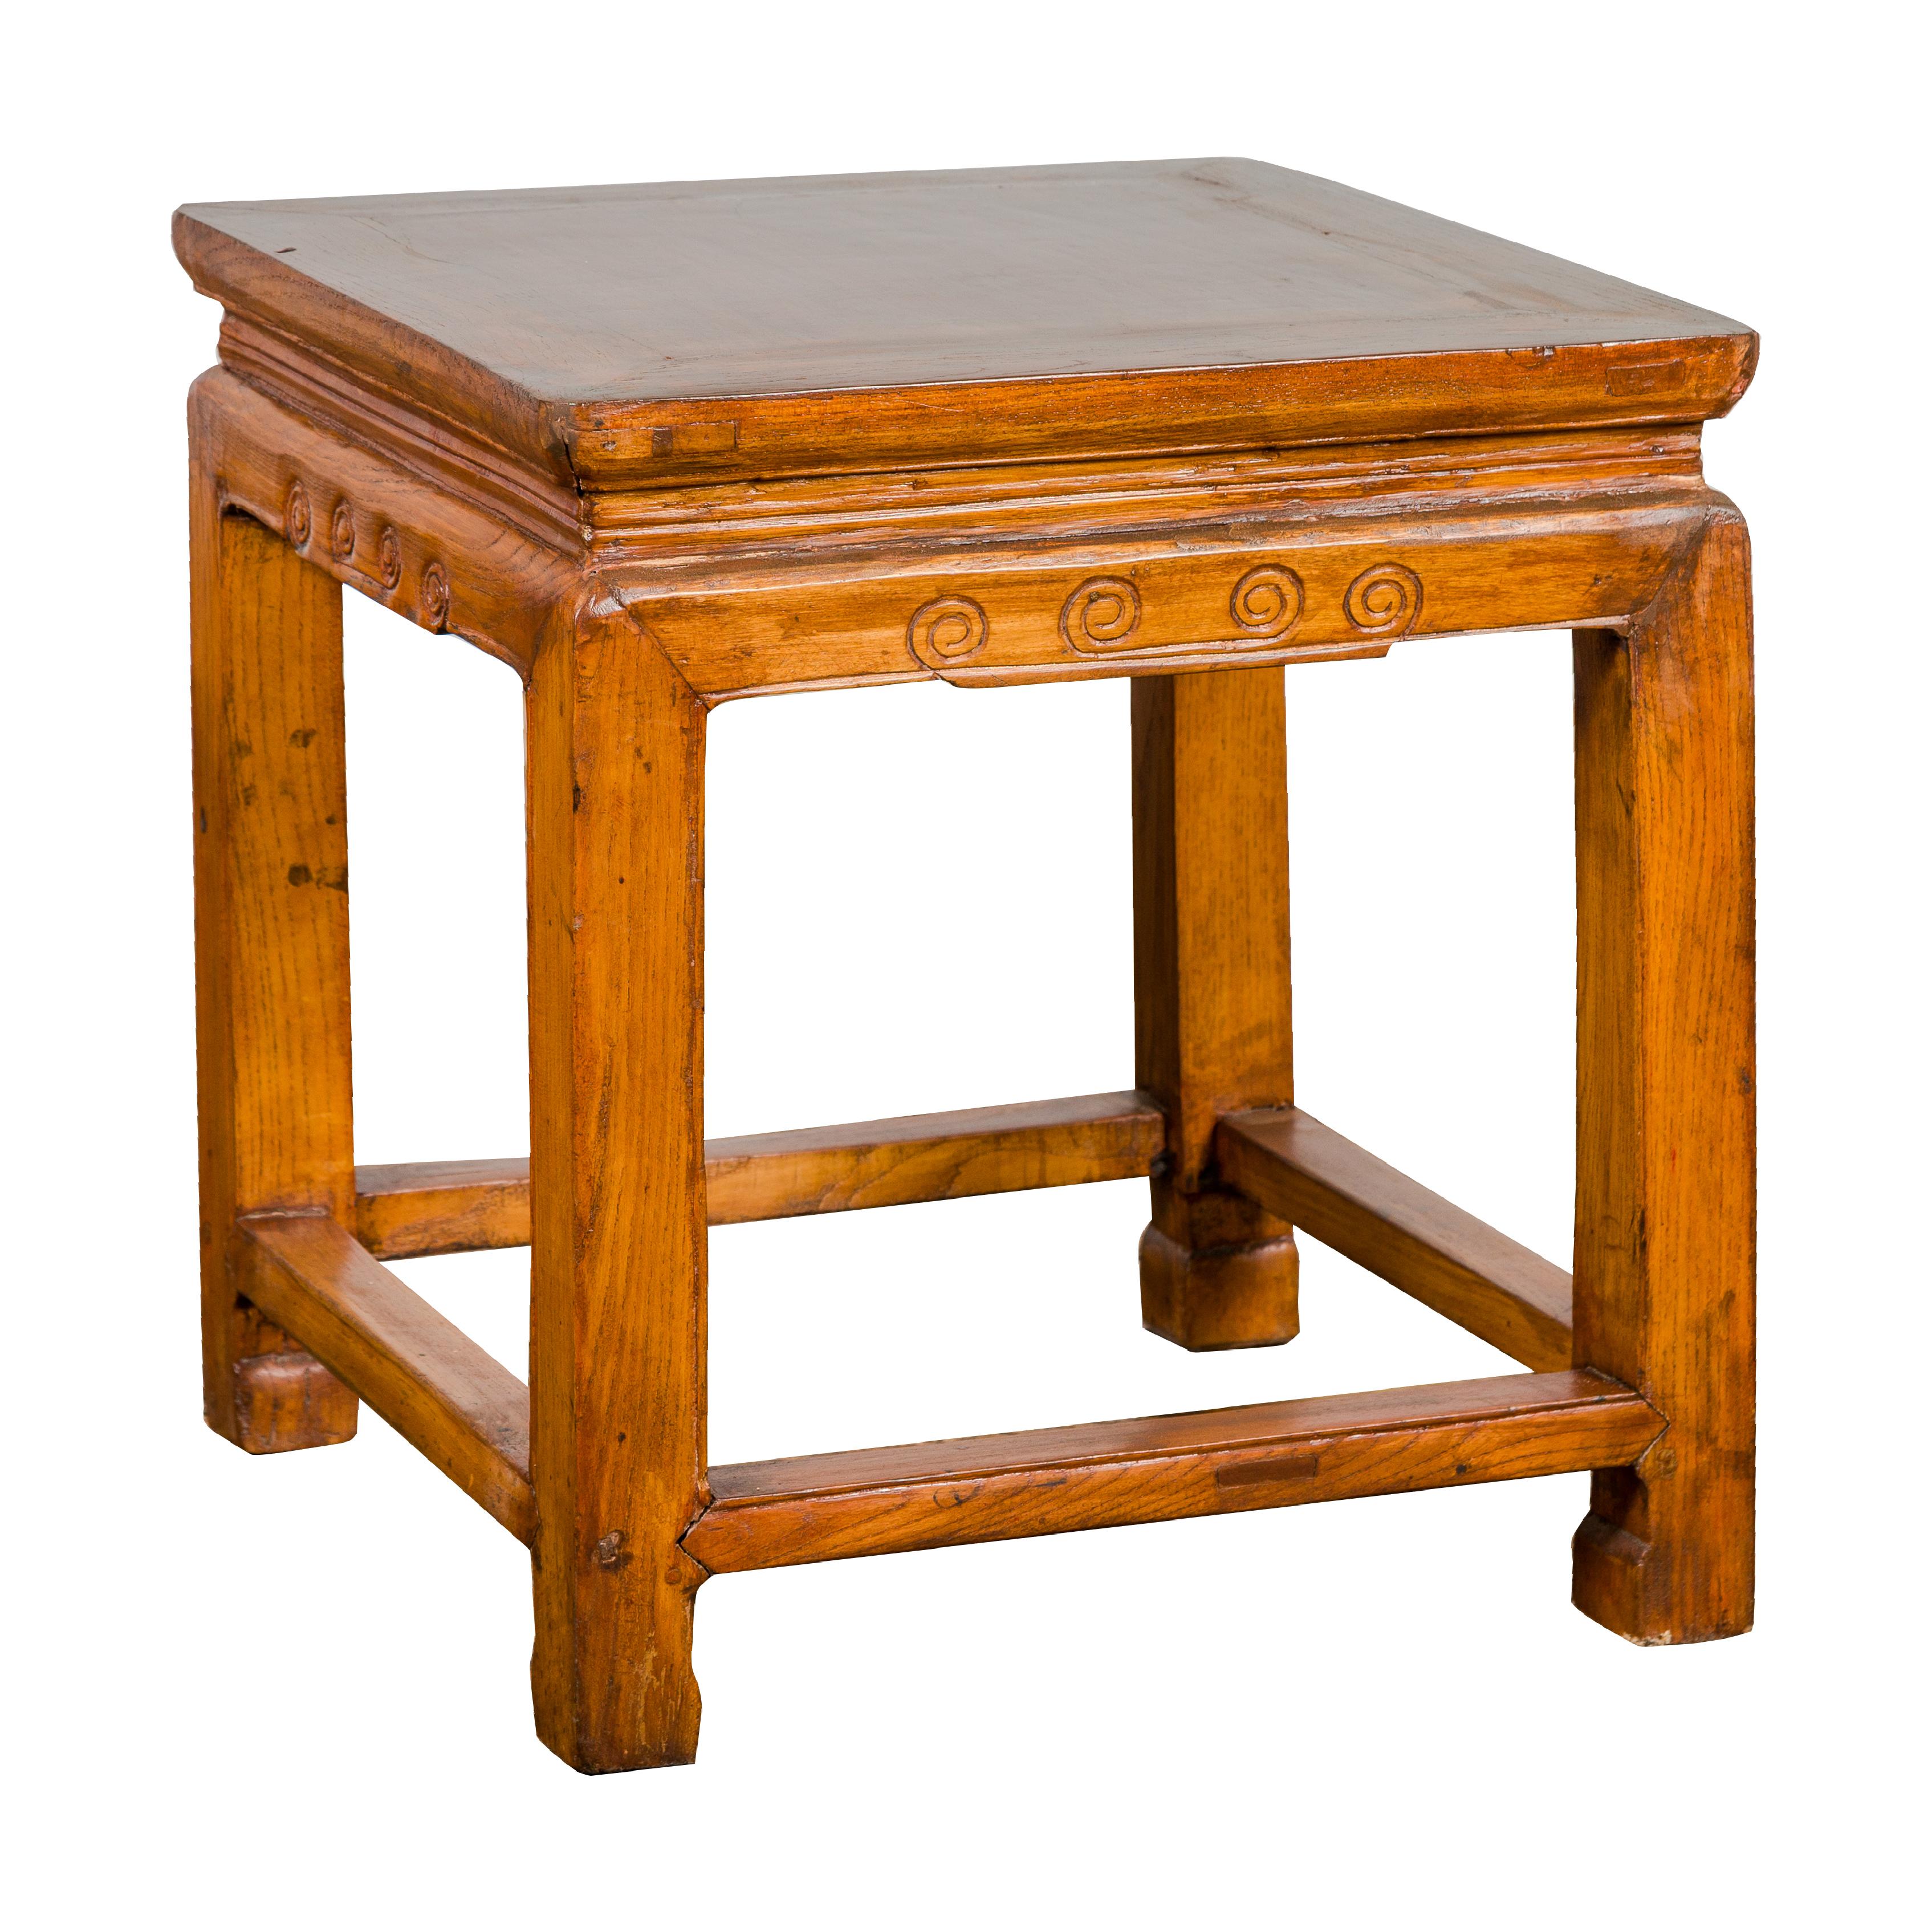 Chinese Elm Qing Dynasty Period Side Table with Horse Hoof Legs and Stretchers For Sale 10